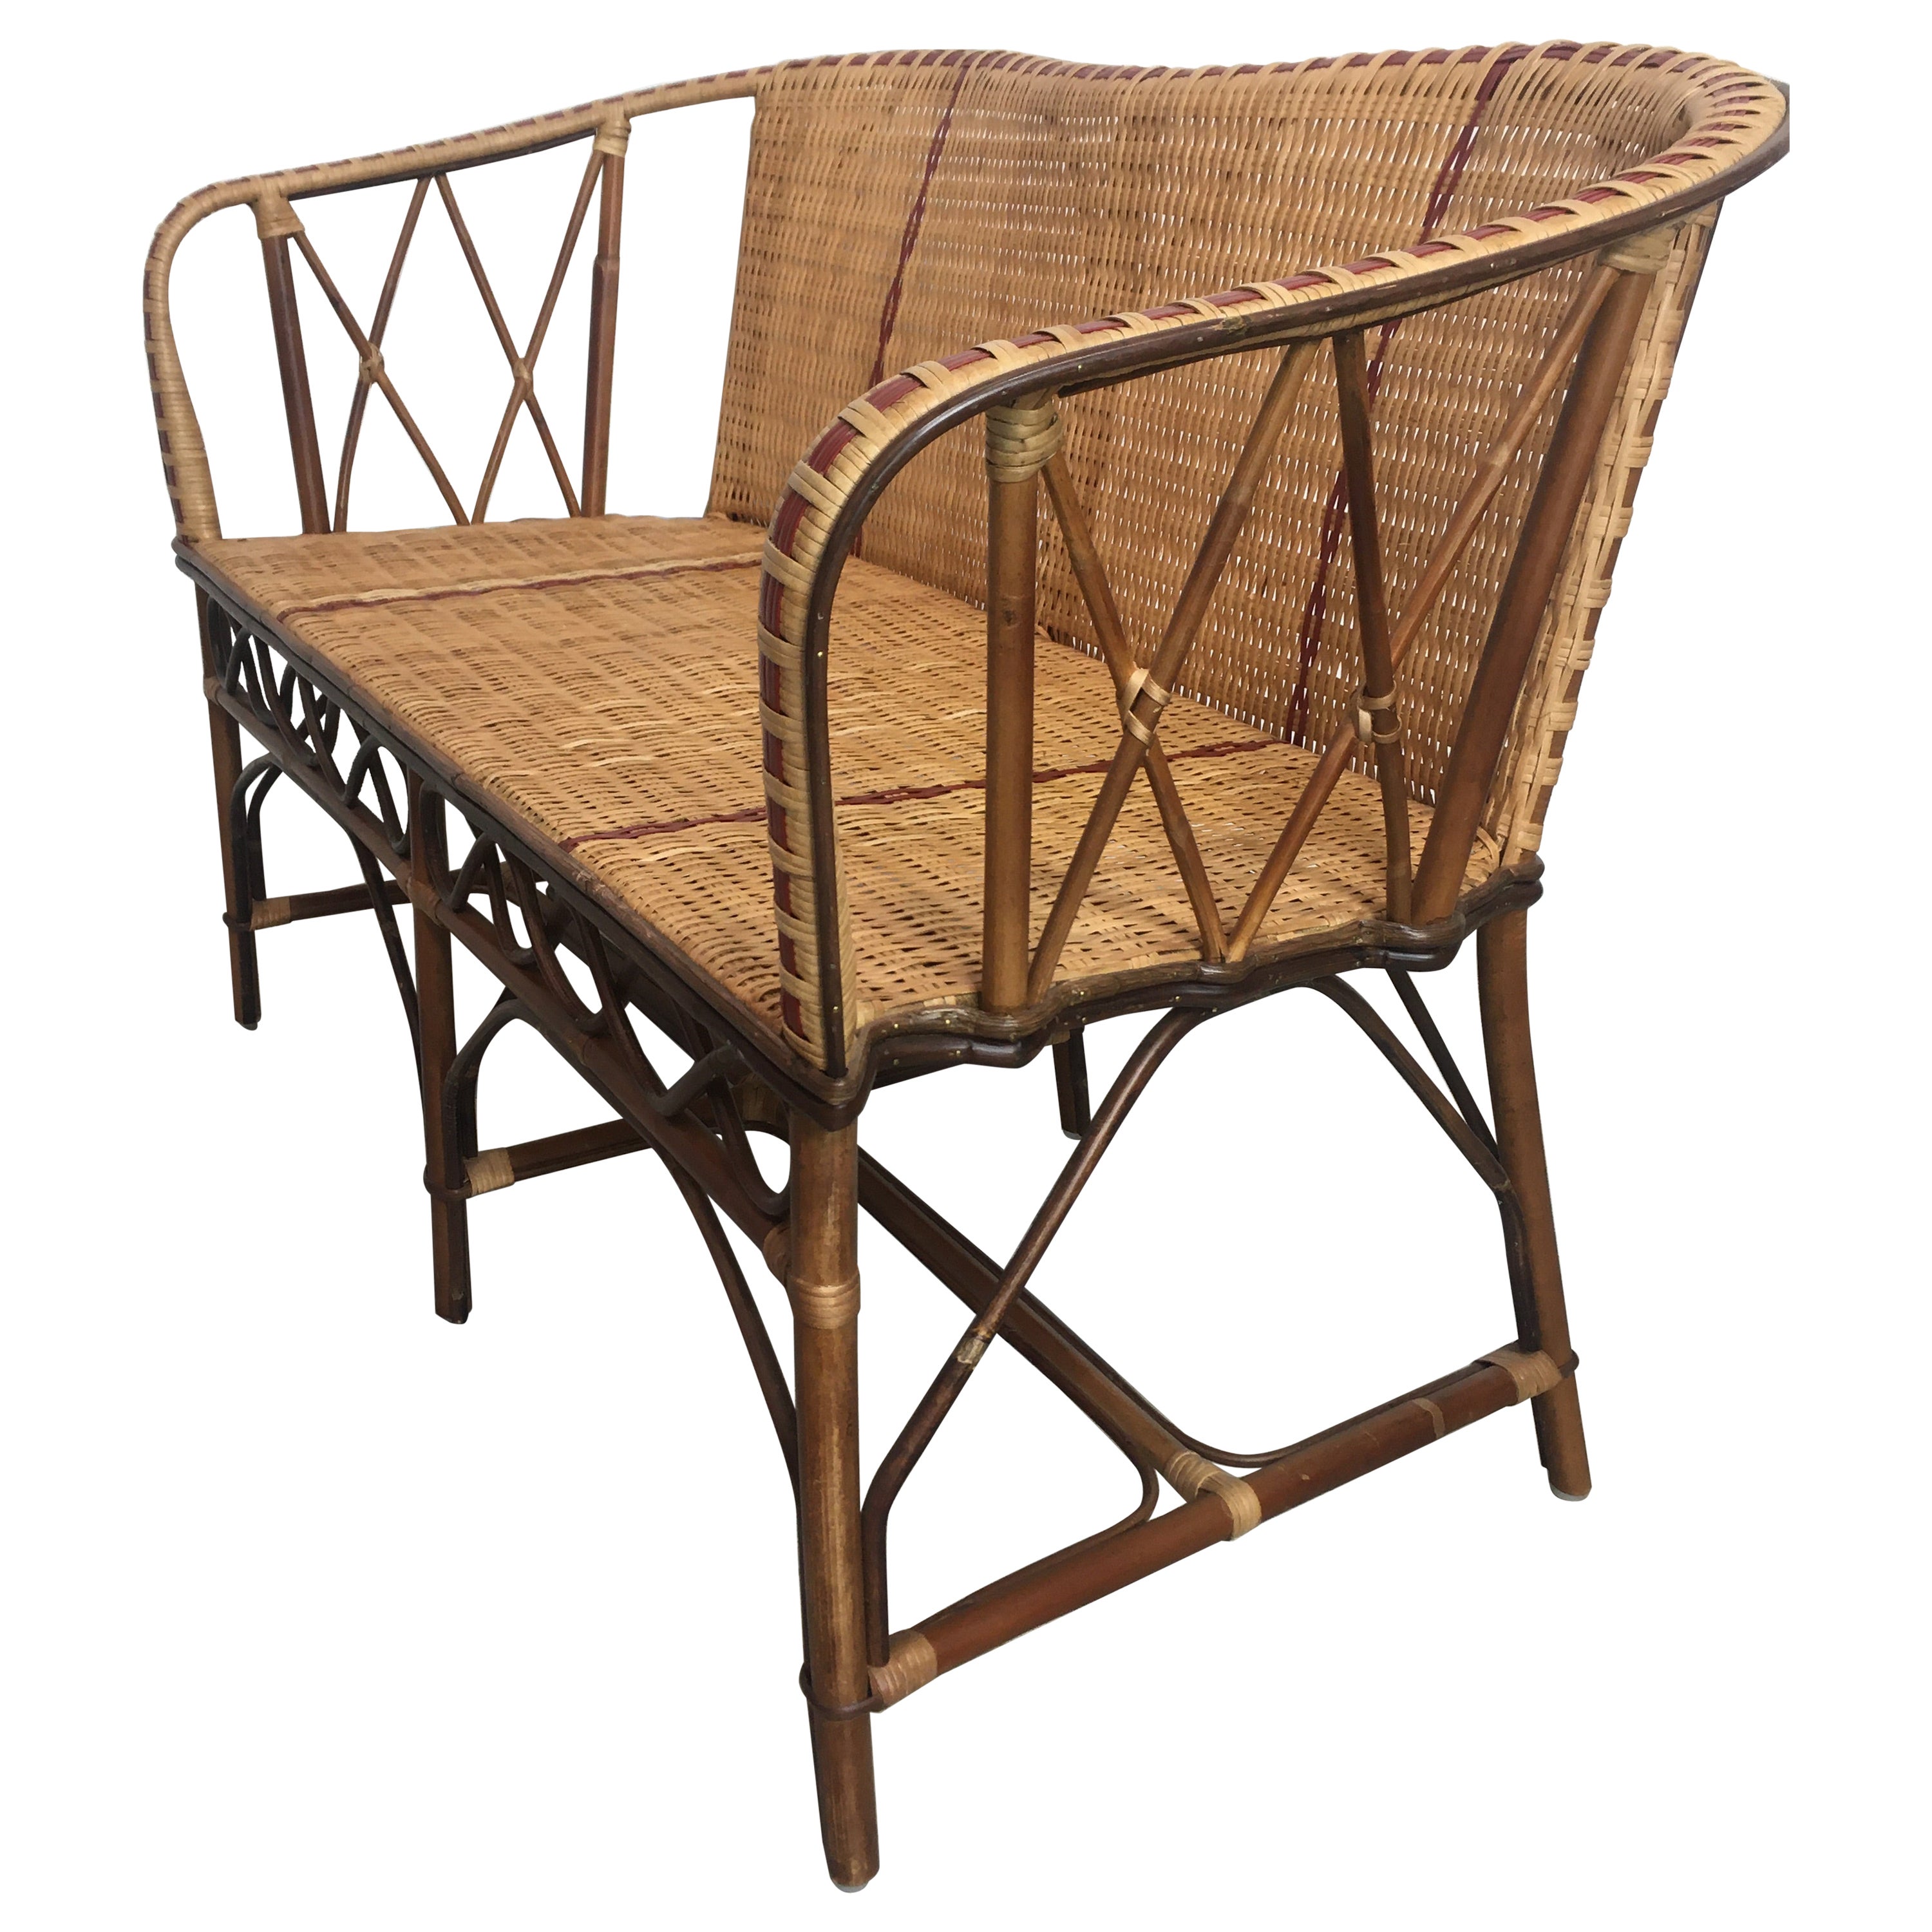 French 1900s Design Bistro Style Sofa In Rattan and Braided Wicker Cane For Sale